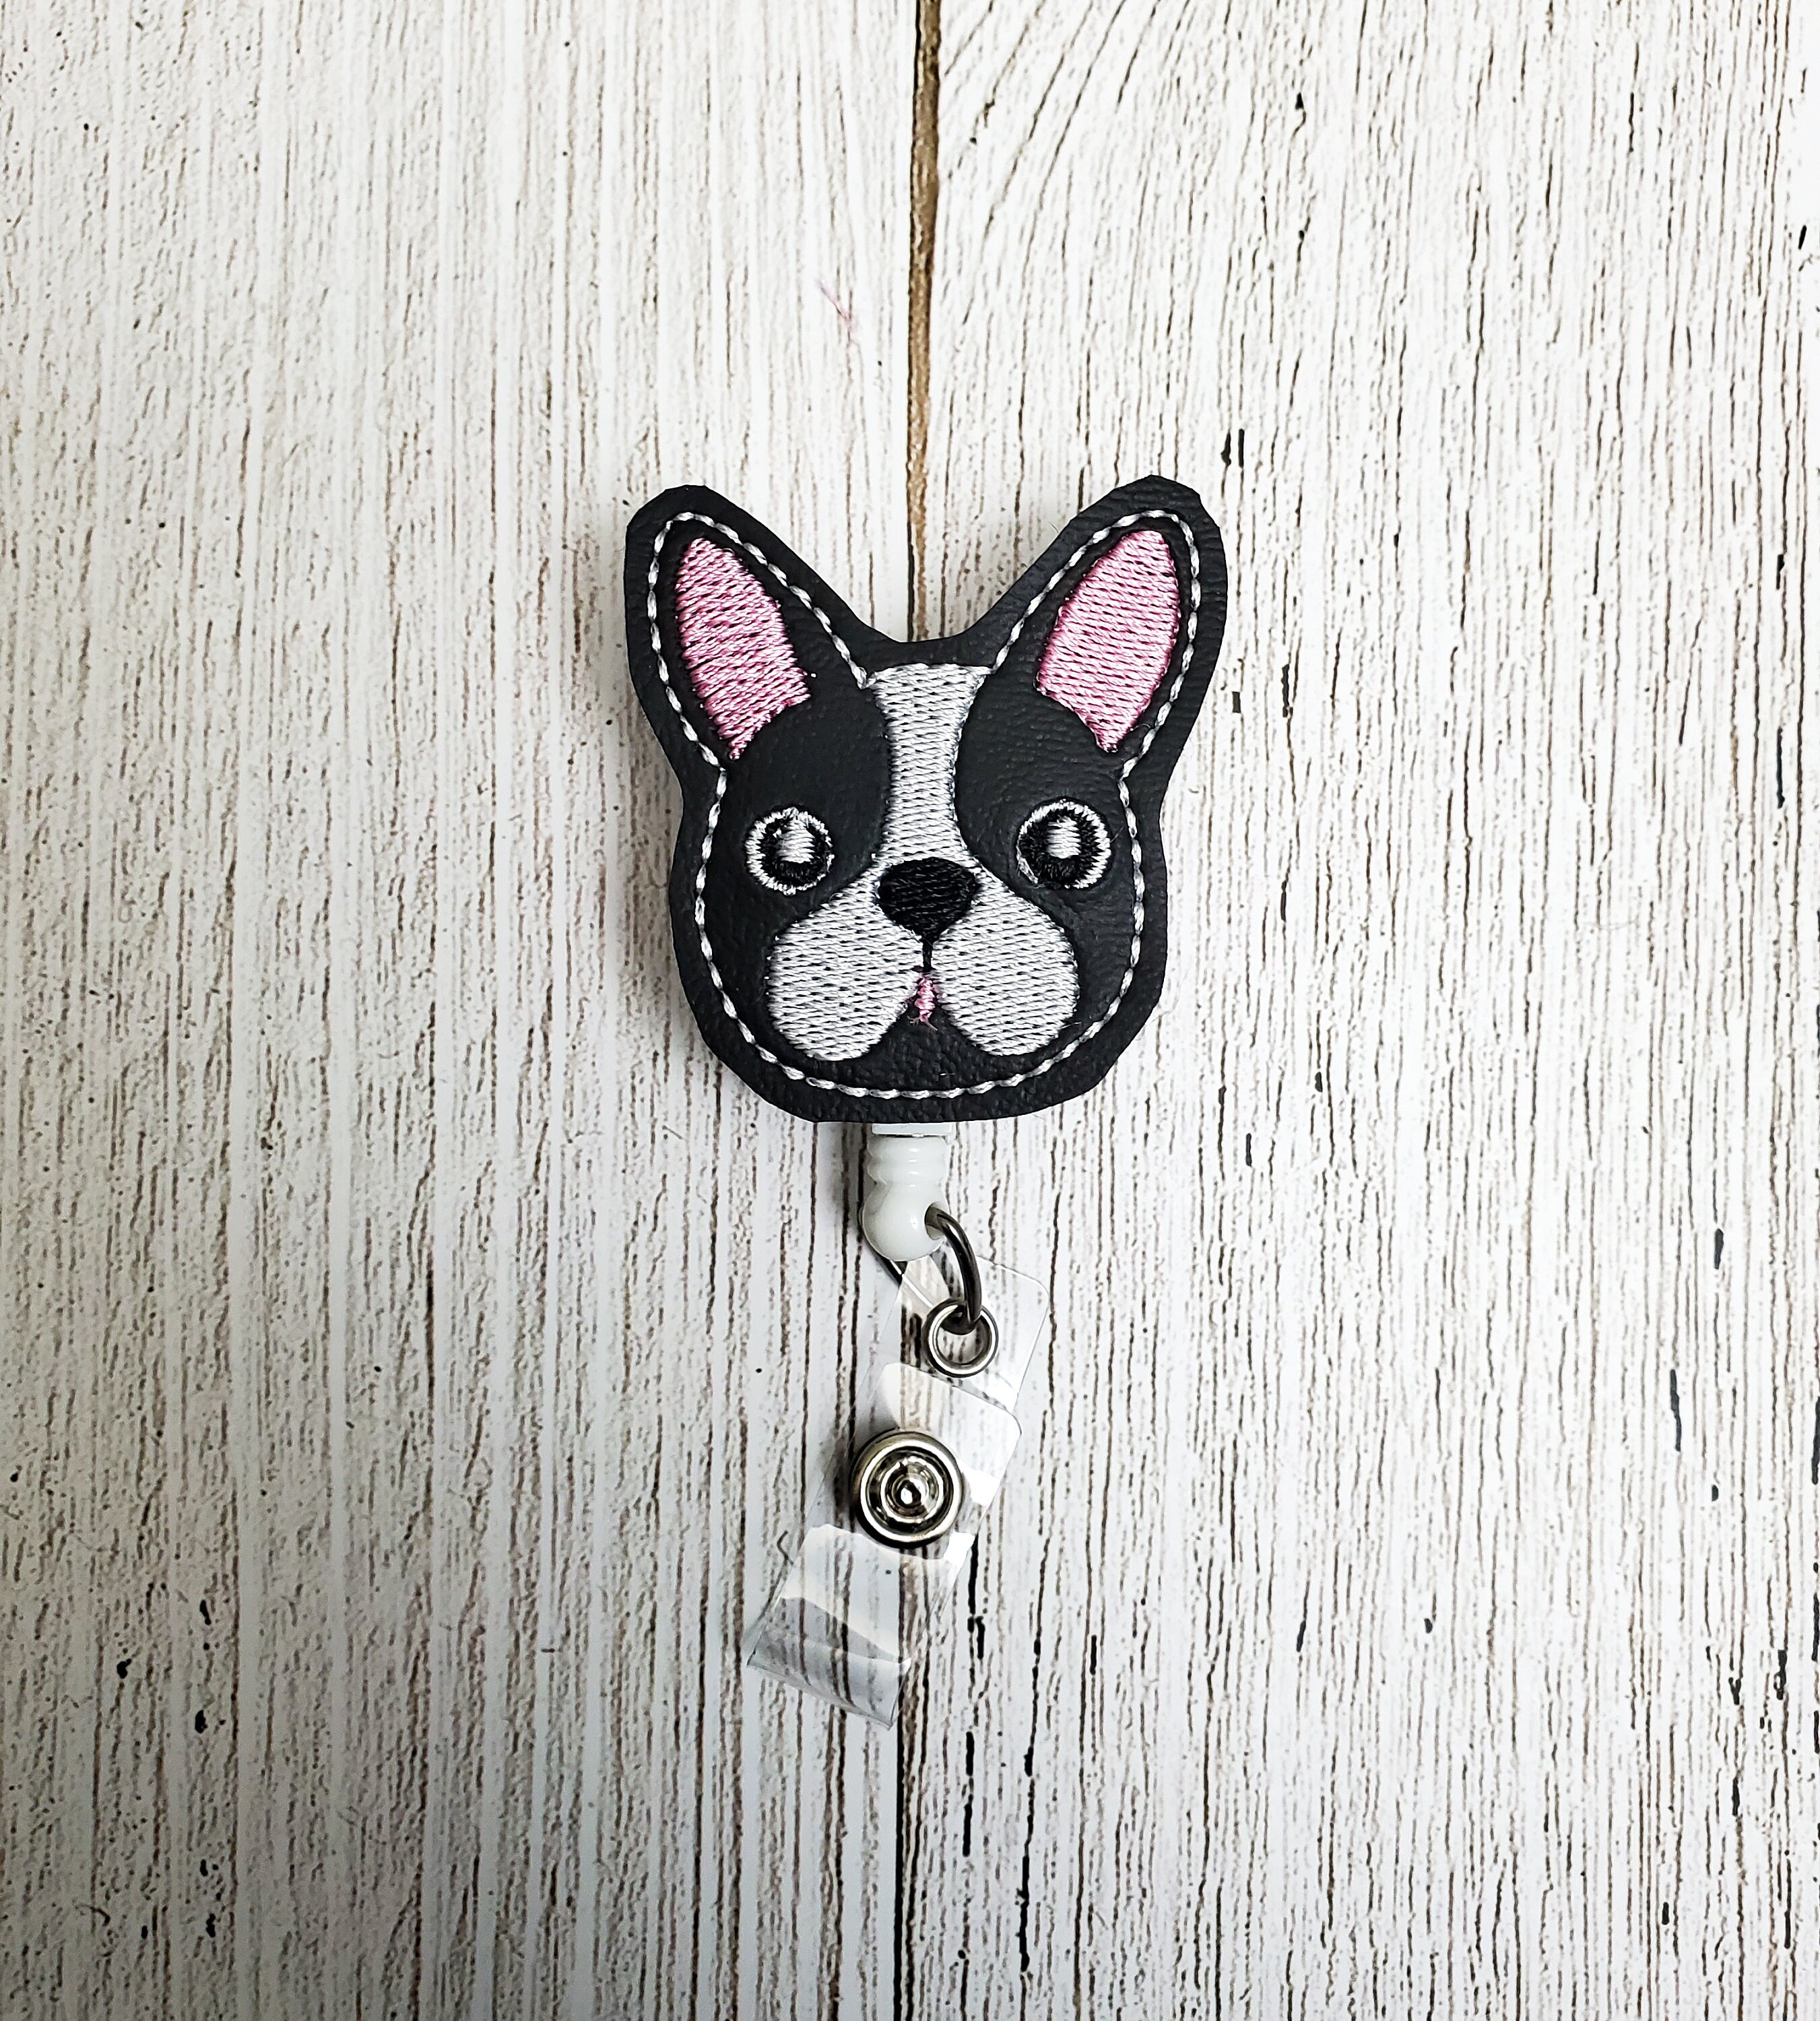 CUFTS Boston Terrier Enamel Pin Metal Black Dog Brooch Gifts for Dog Lovers Boston Terrier Lapel Pin Jewelry 